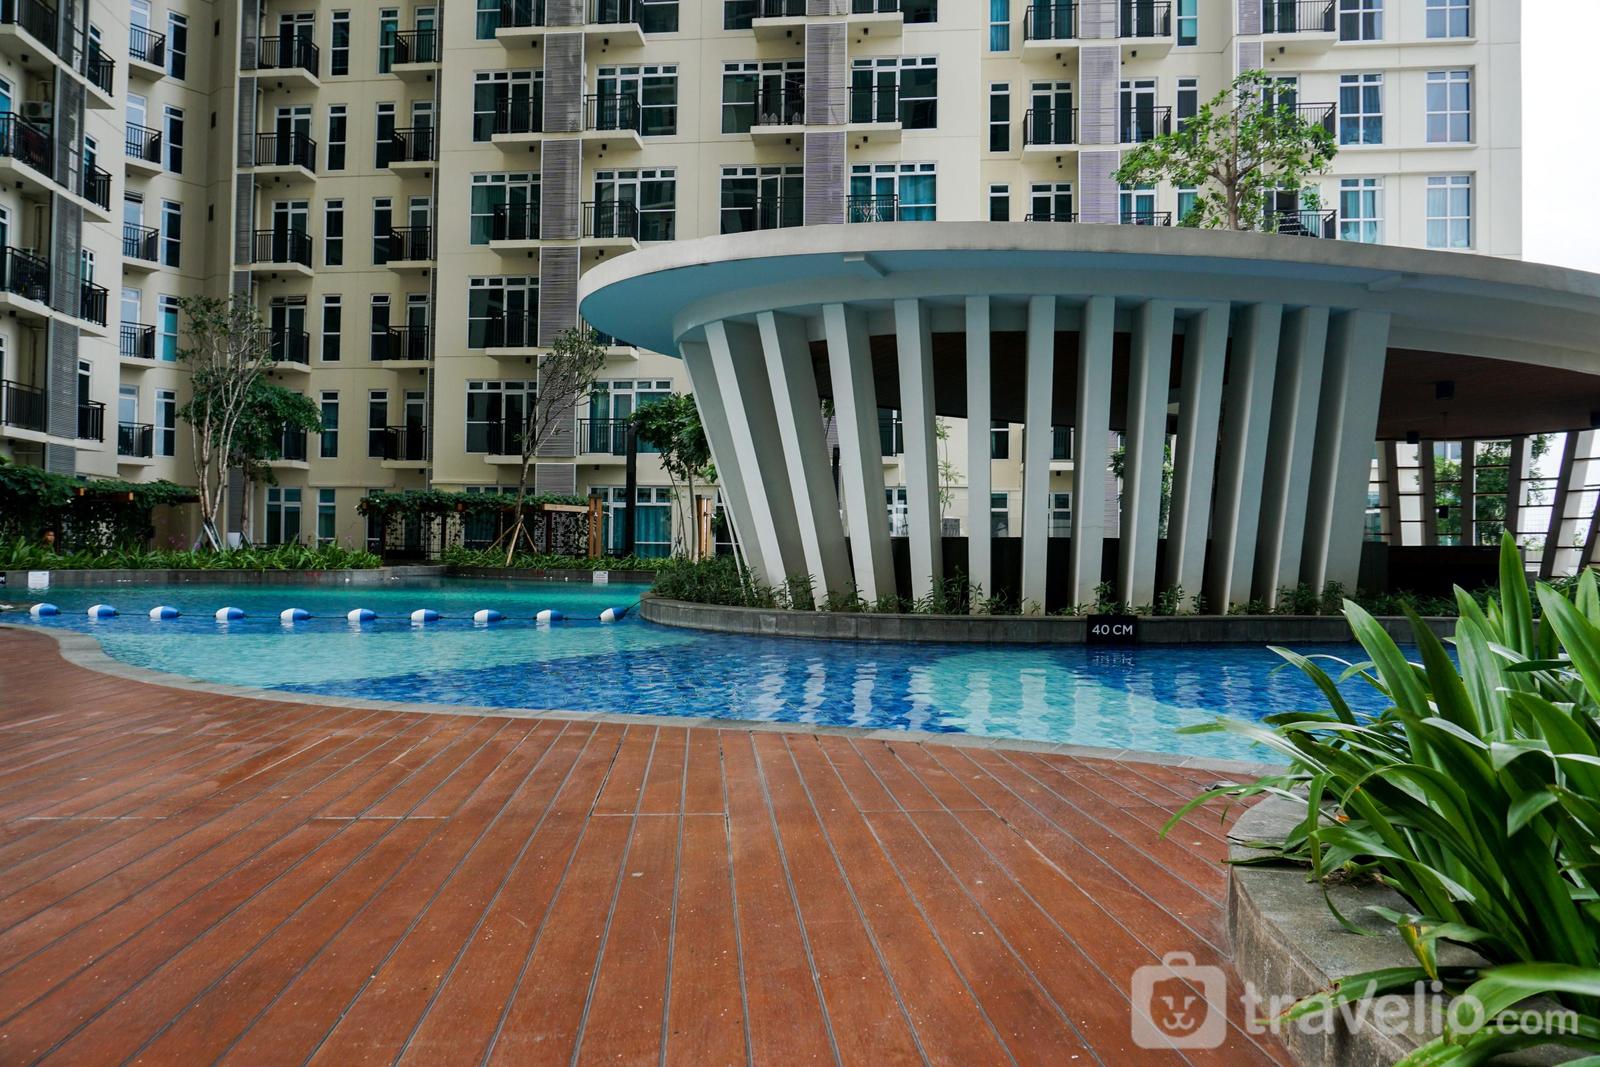 6 Recommended Apartments Co Living Near Soekarno Hatta Airport